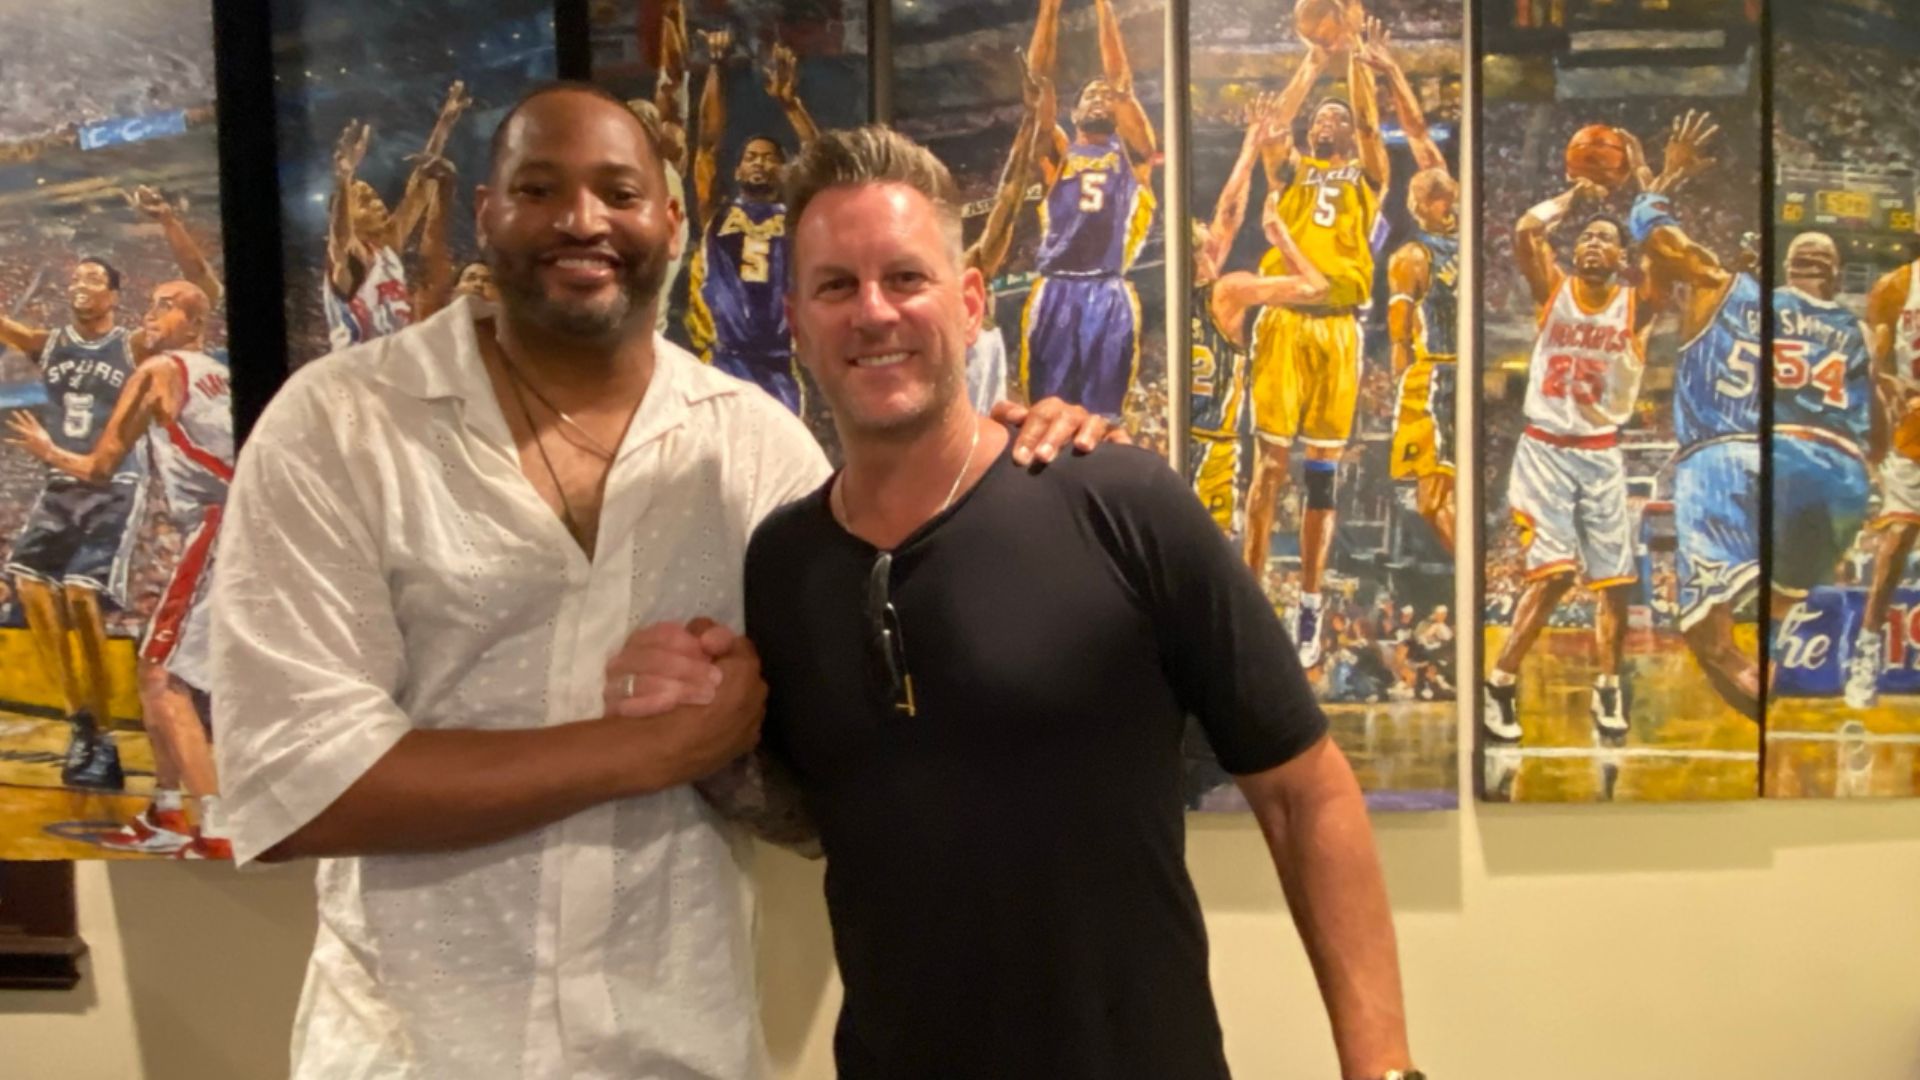 NBA champion Robert Horry draws on daughter's health struggles and joins ICHRA movement